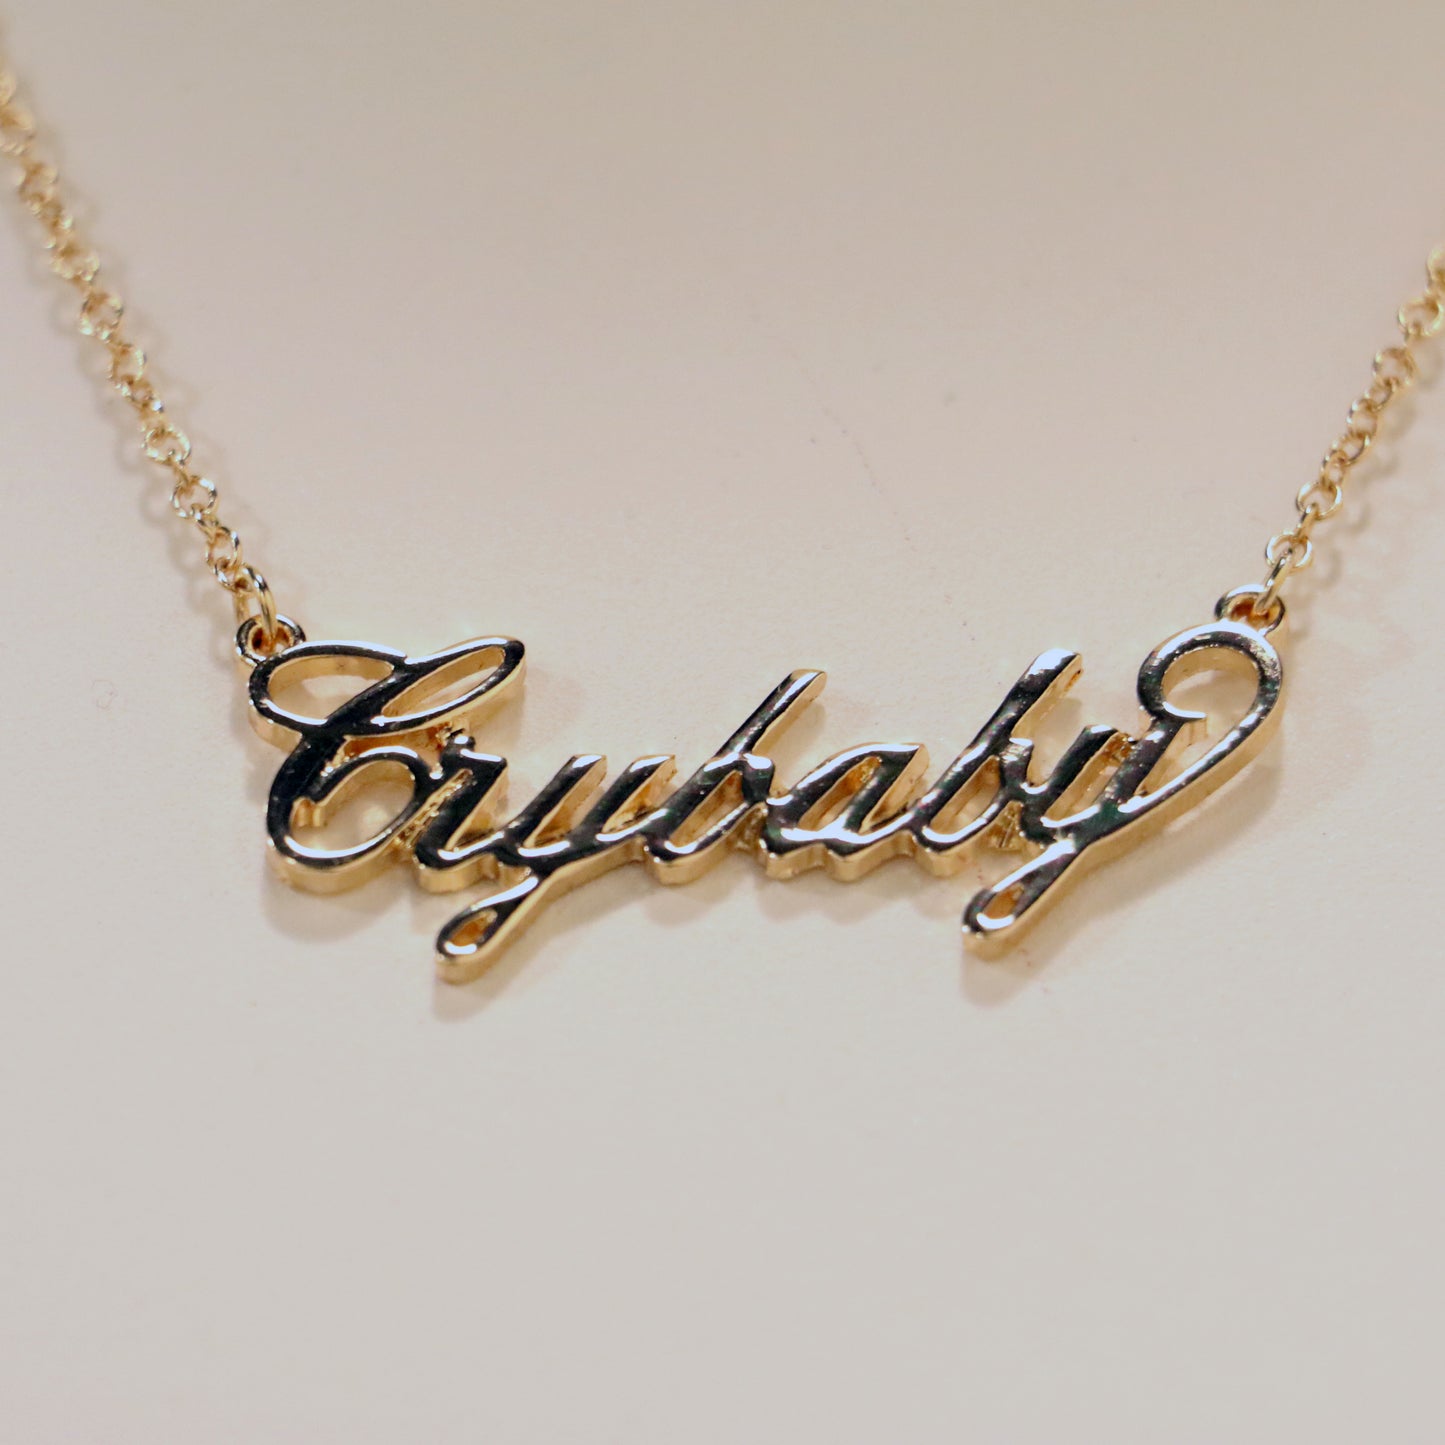 Crybaby Nameplate Necklace